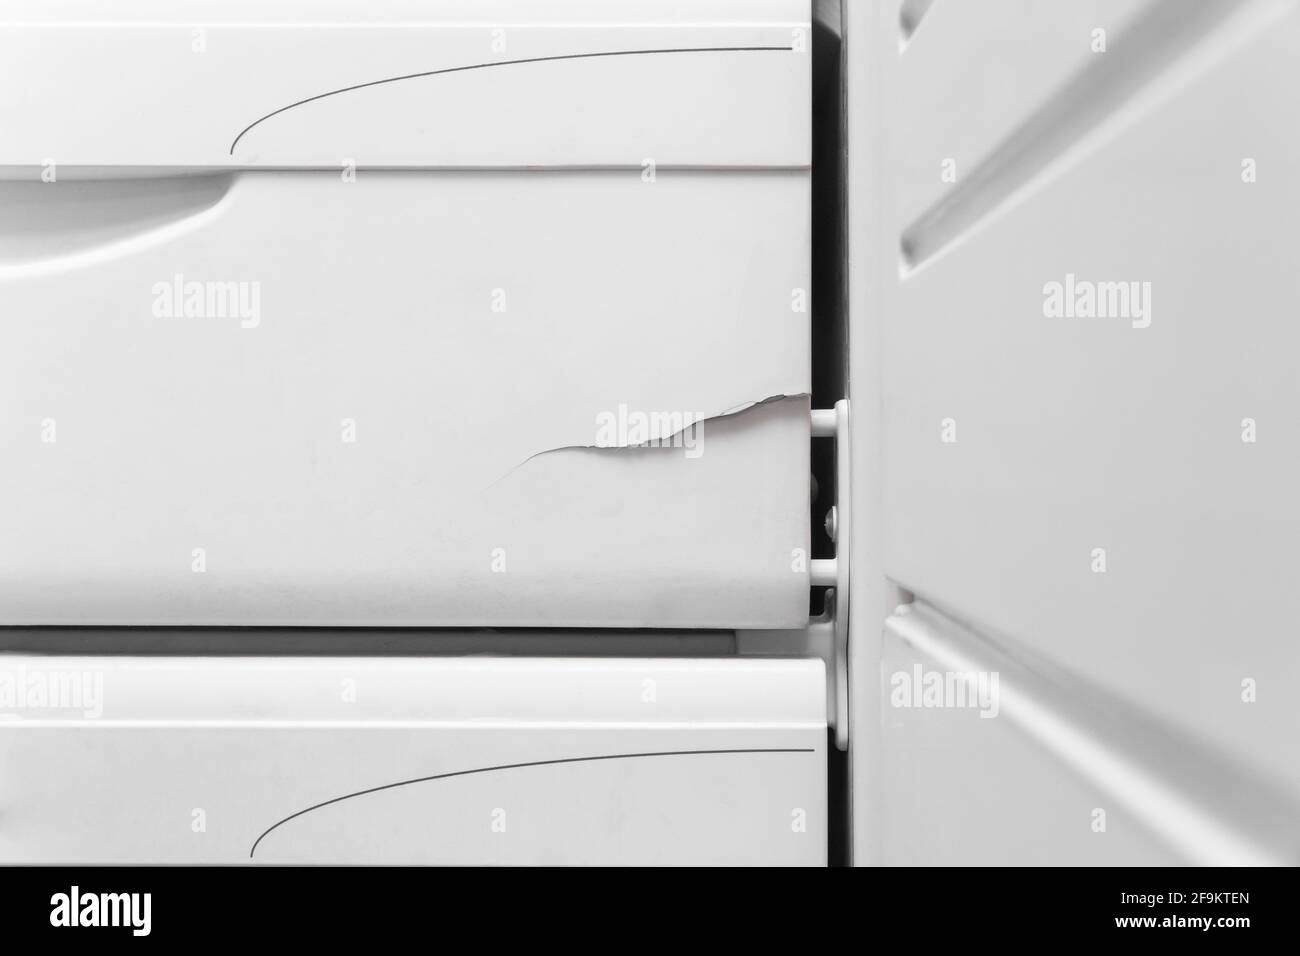 Crack on the polystyrene lid of the refrigerator freezer, close-up. The need to repair the refrigerator. Stock Photo